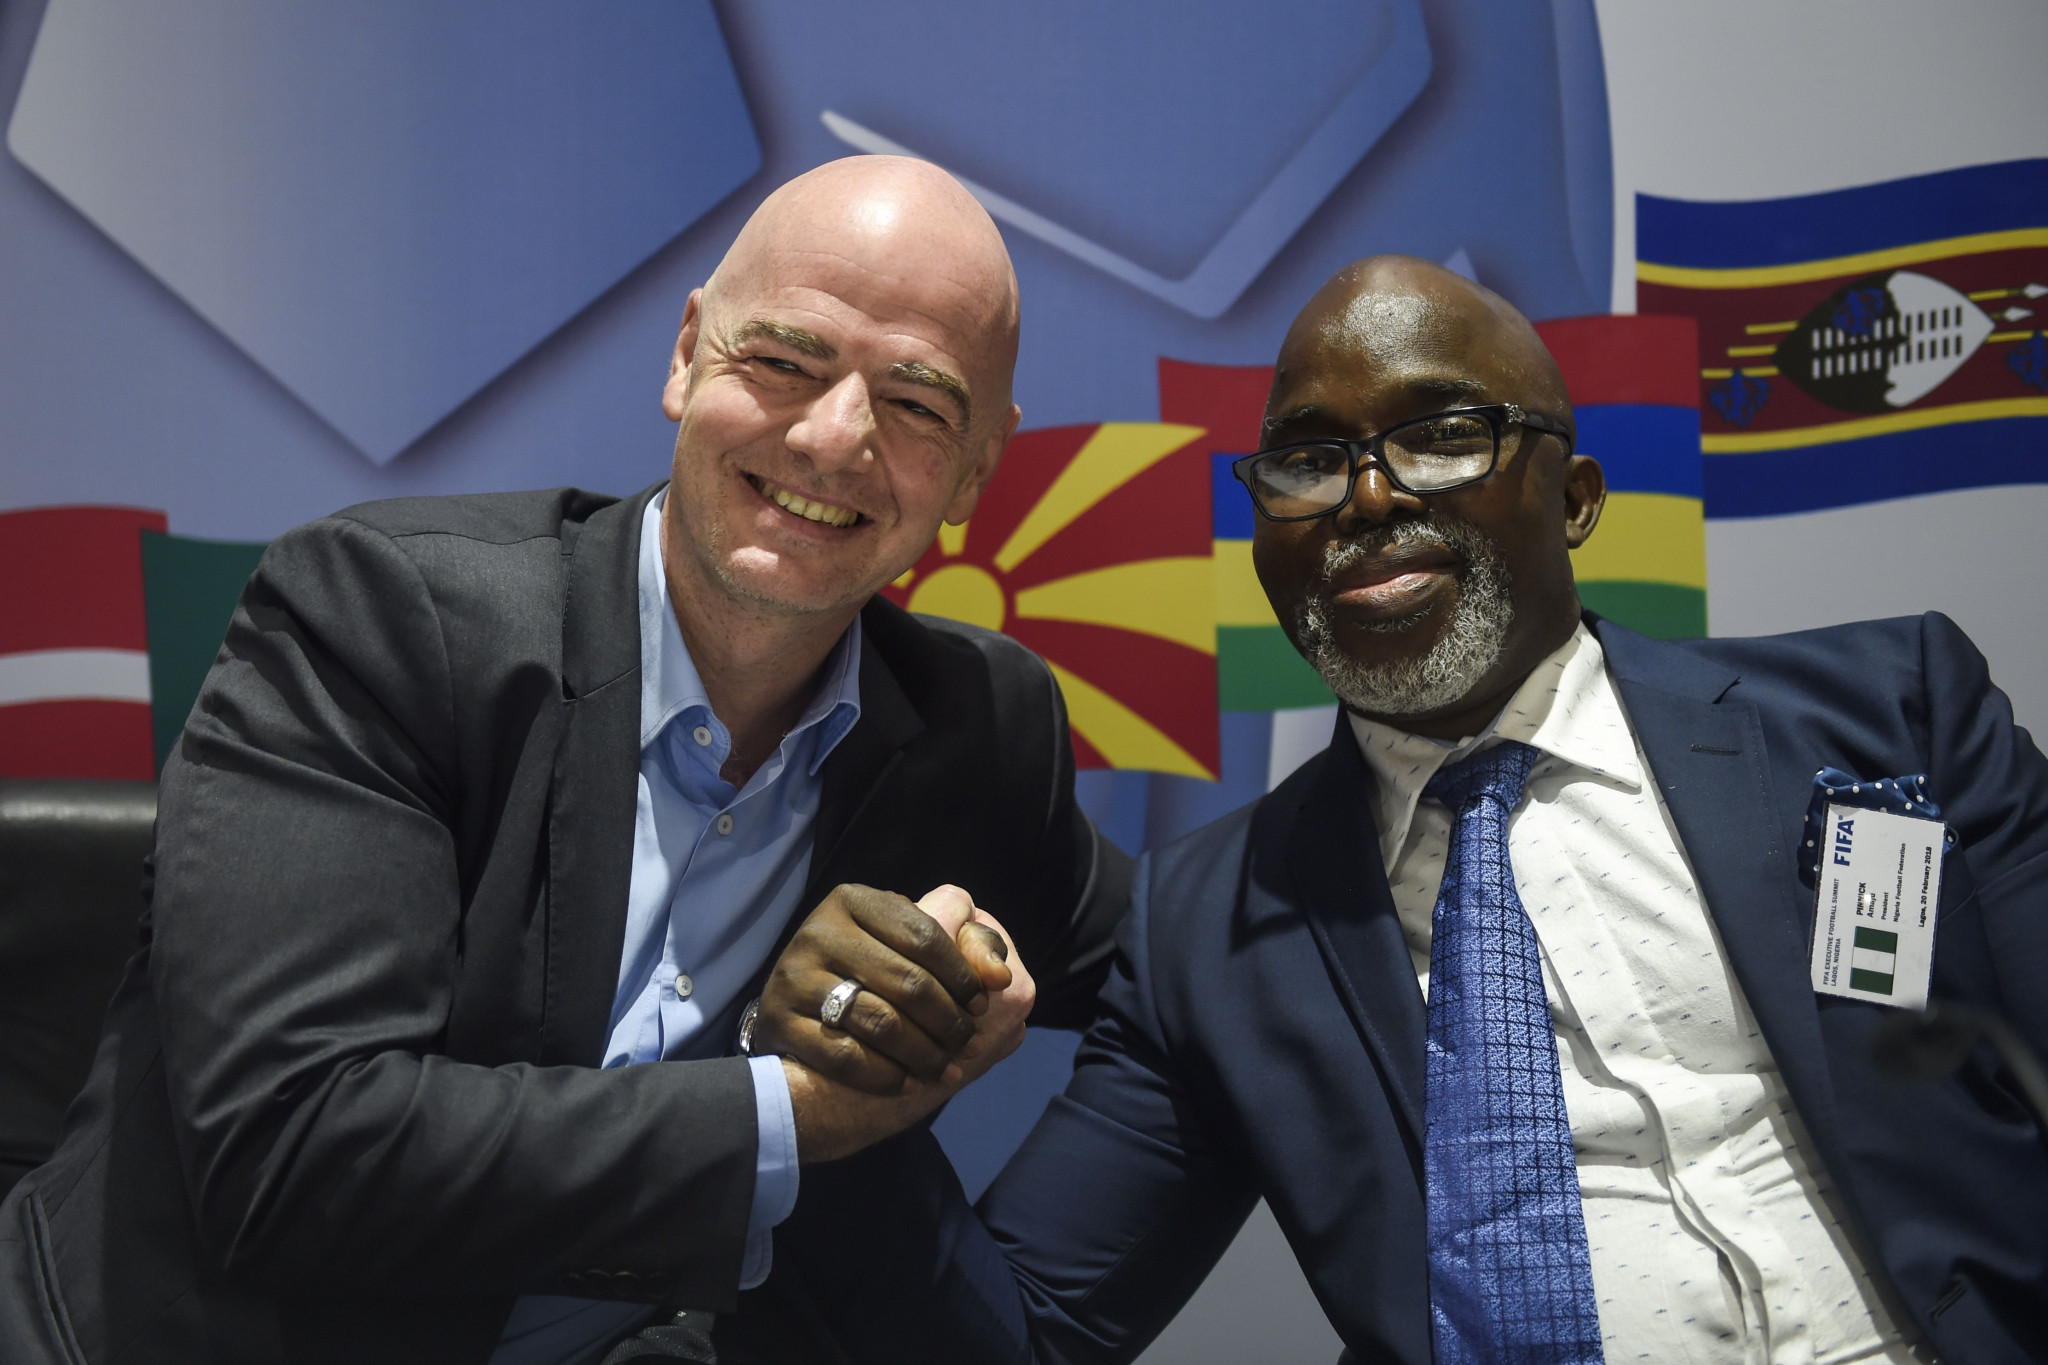 Nigerian Football Federation President Amaju Pinnick, pictured here with FIFA counterpart Gianni Infantino, claimed the issue came down to a misunderstanding ©Getty Images